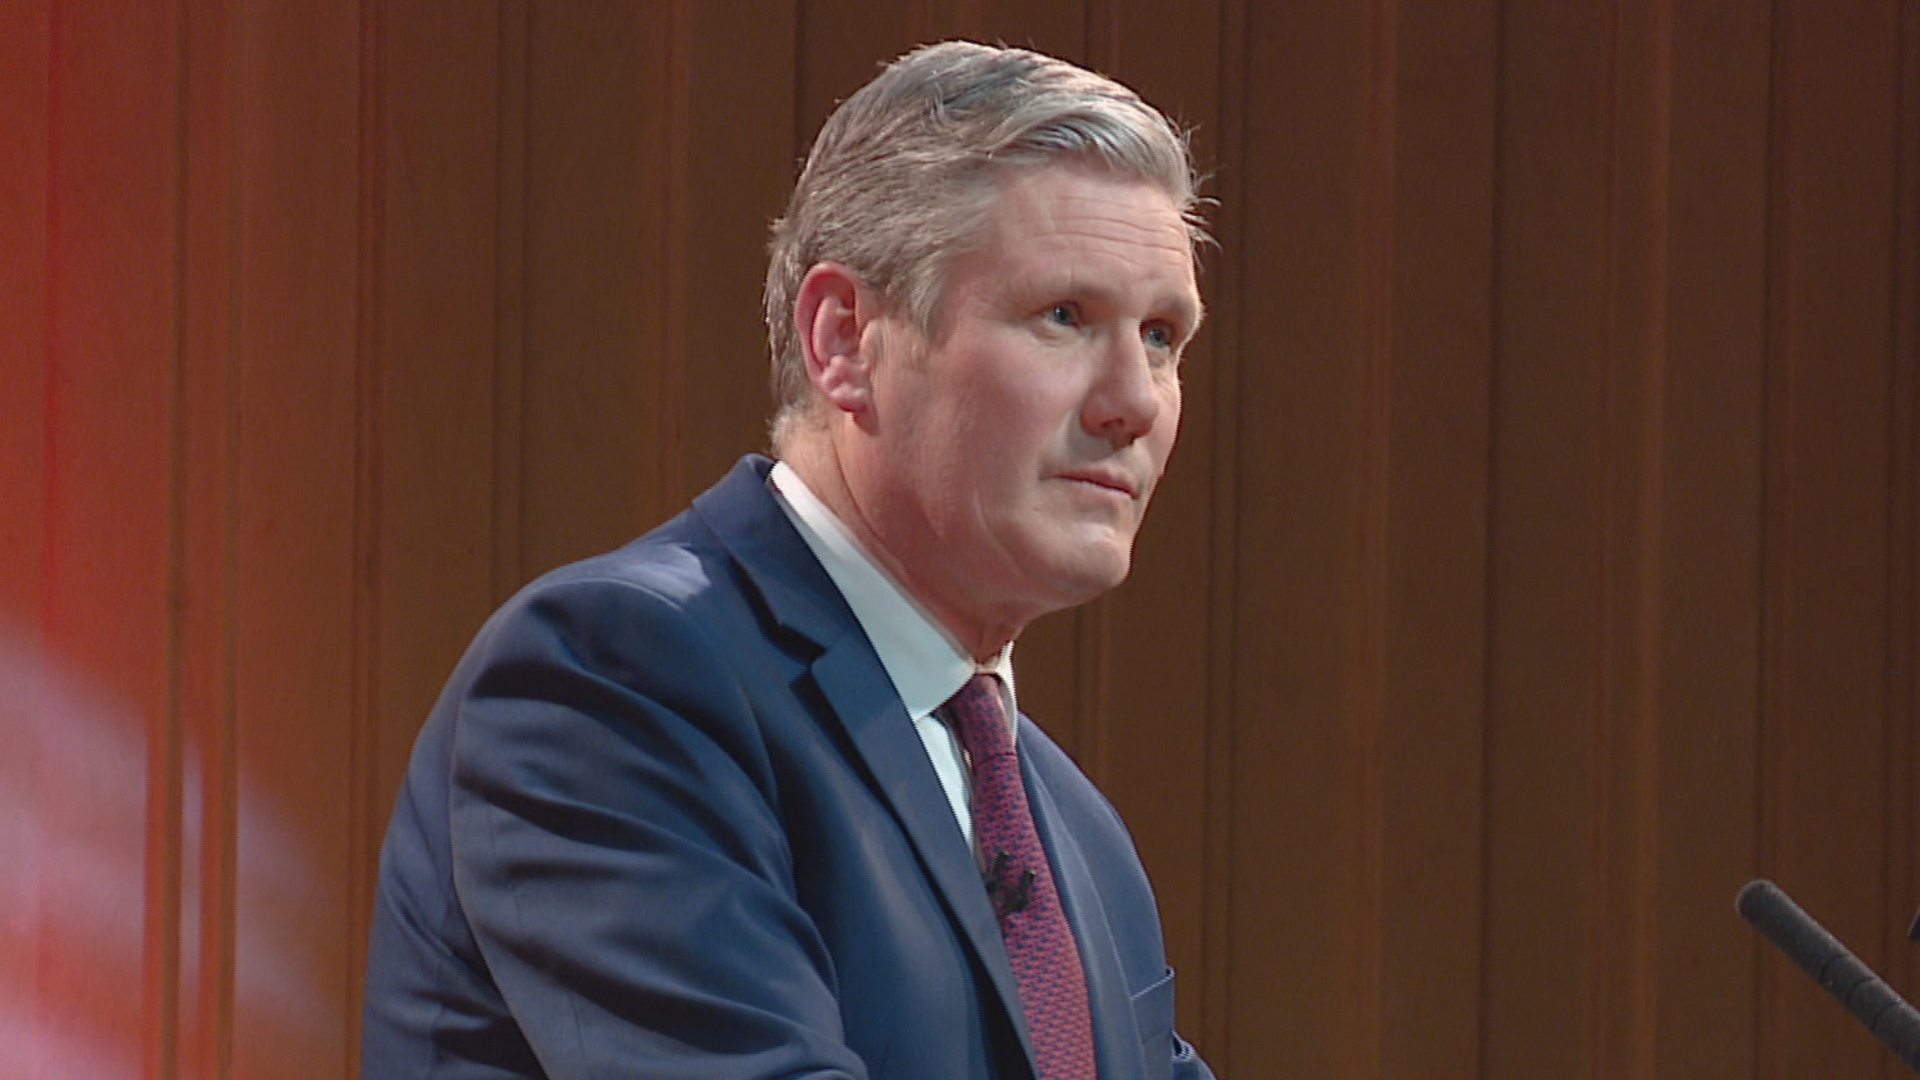 Keir Starmer said Labour would not reverse the two-child benefit cap.